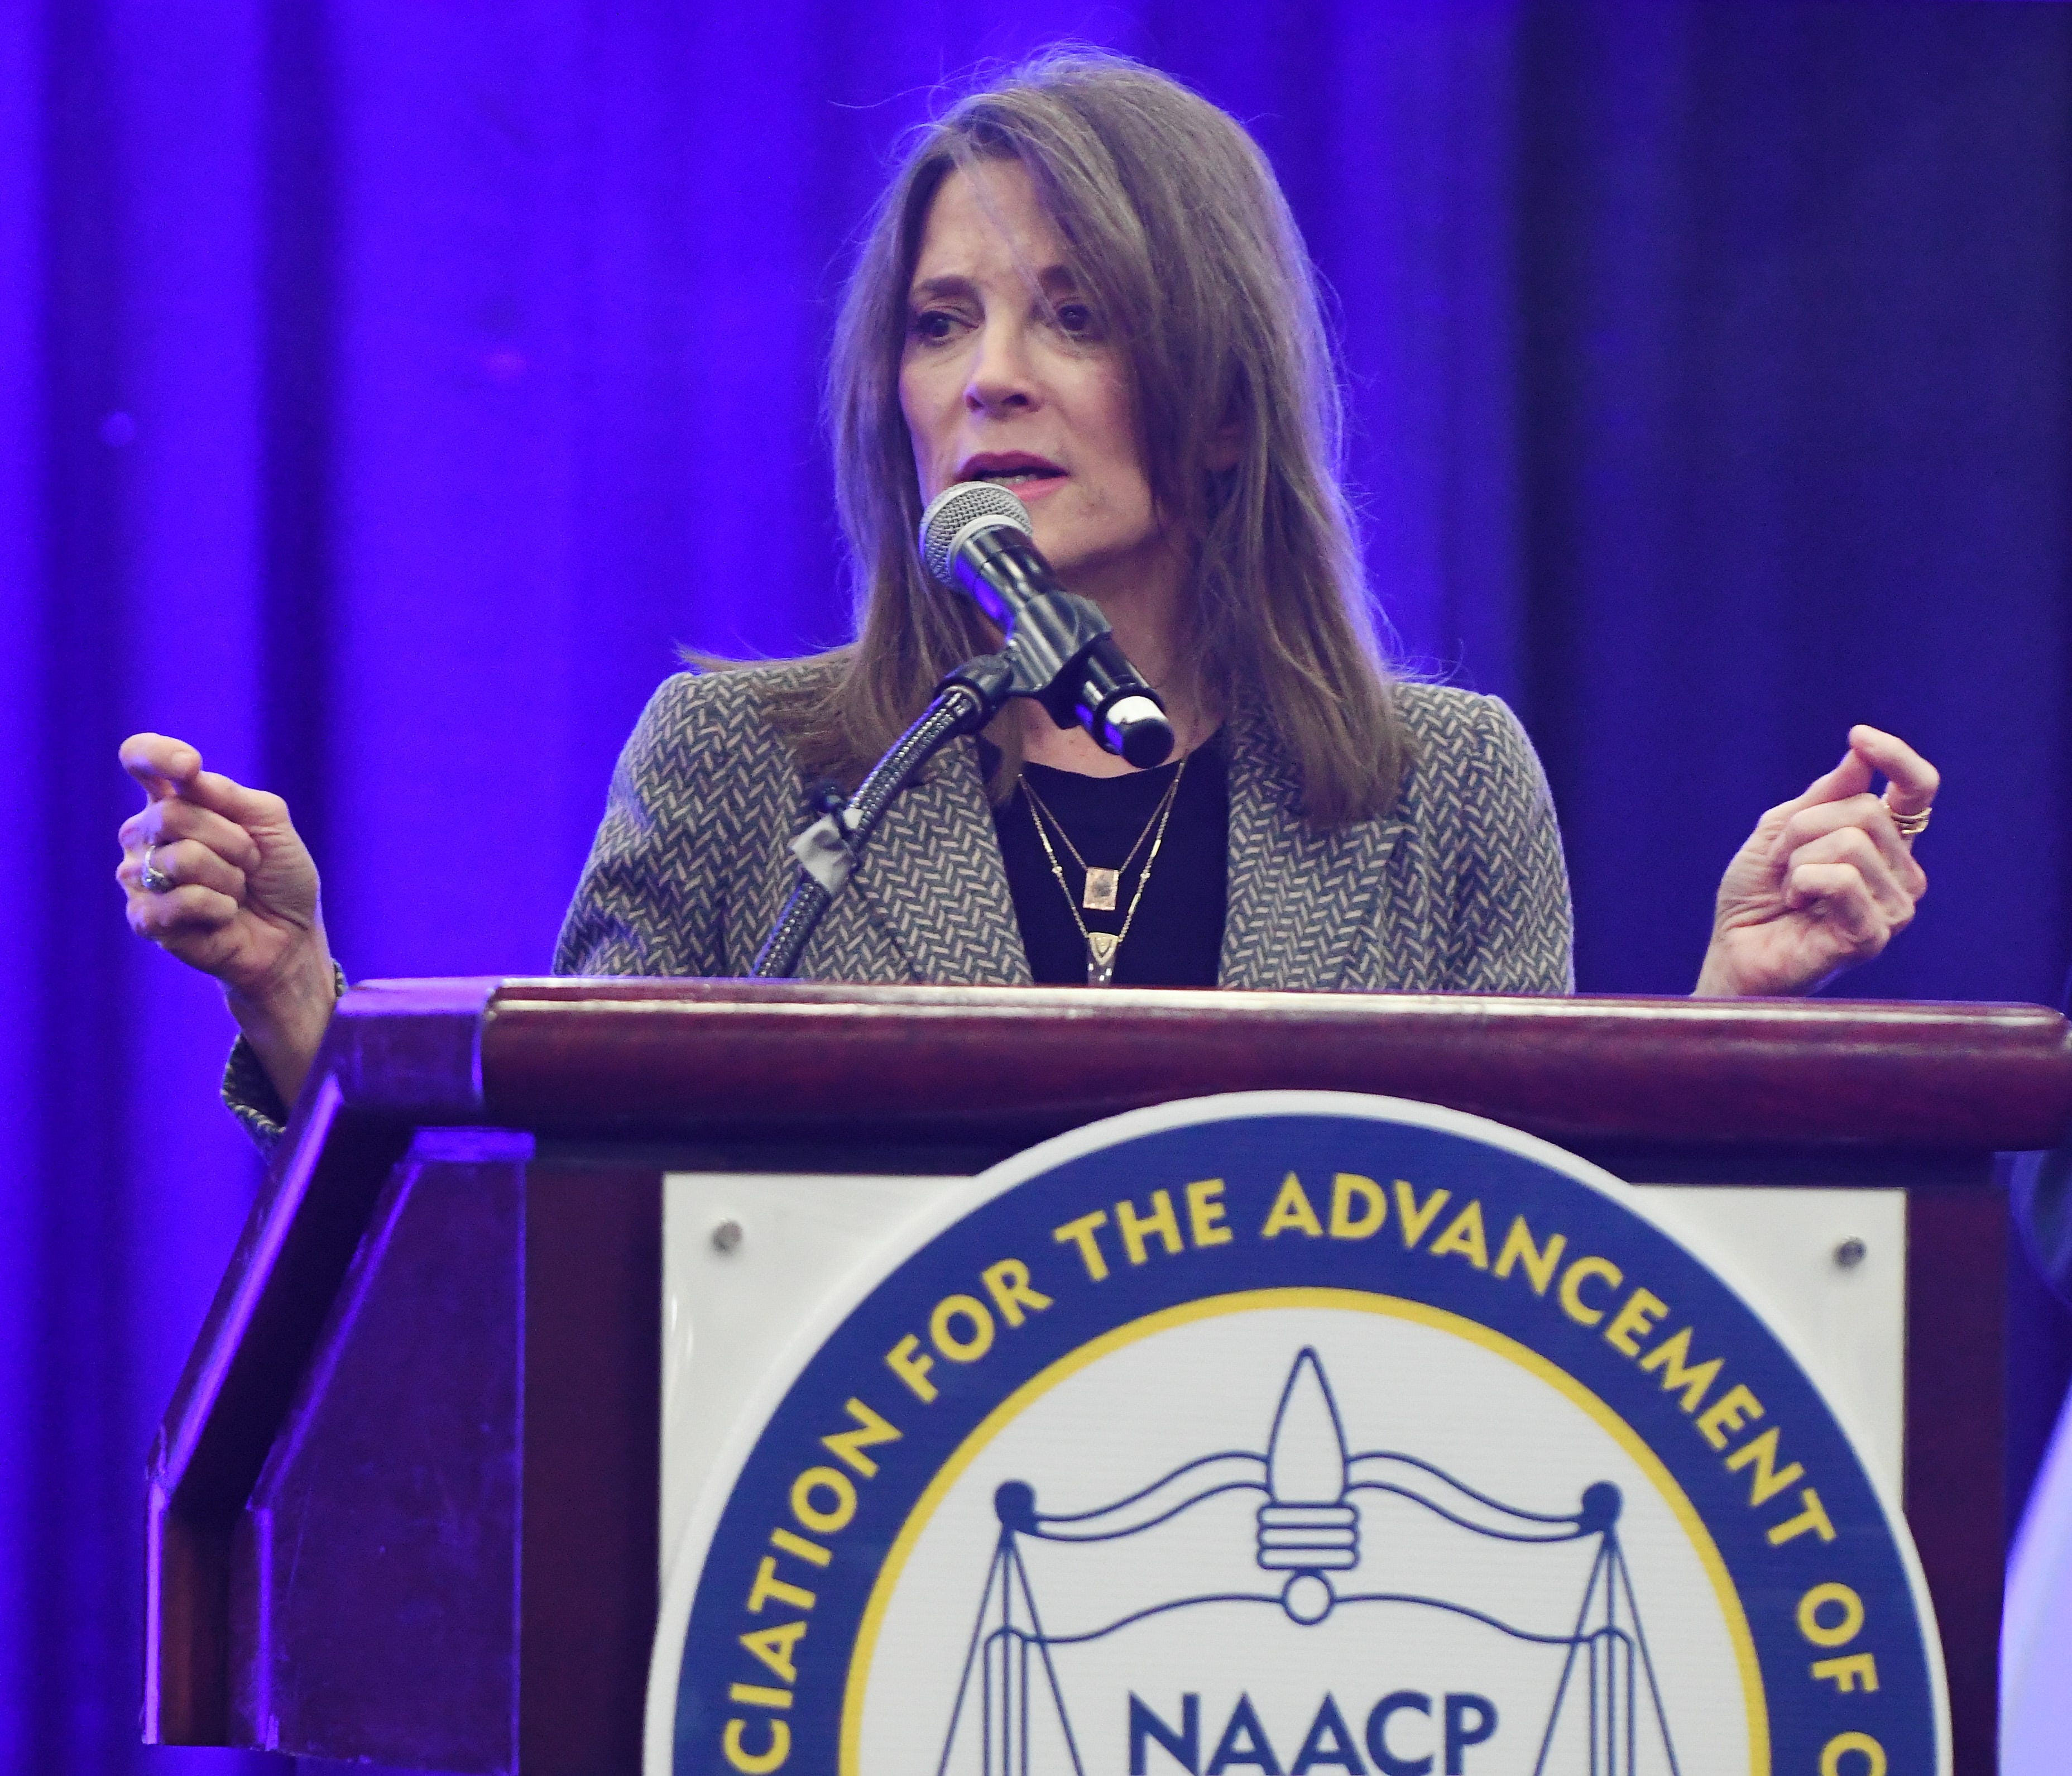 Presidential candidate Marianne Williamson speaks during the 110th NAACP Convention at Cobo Center, in Detroit, Michigan on July 23, 2019.